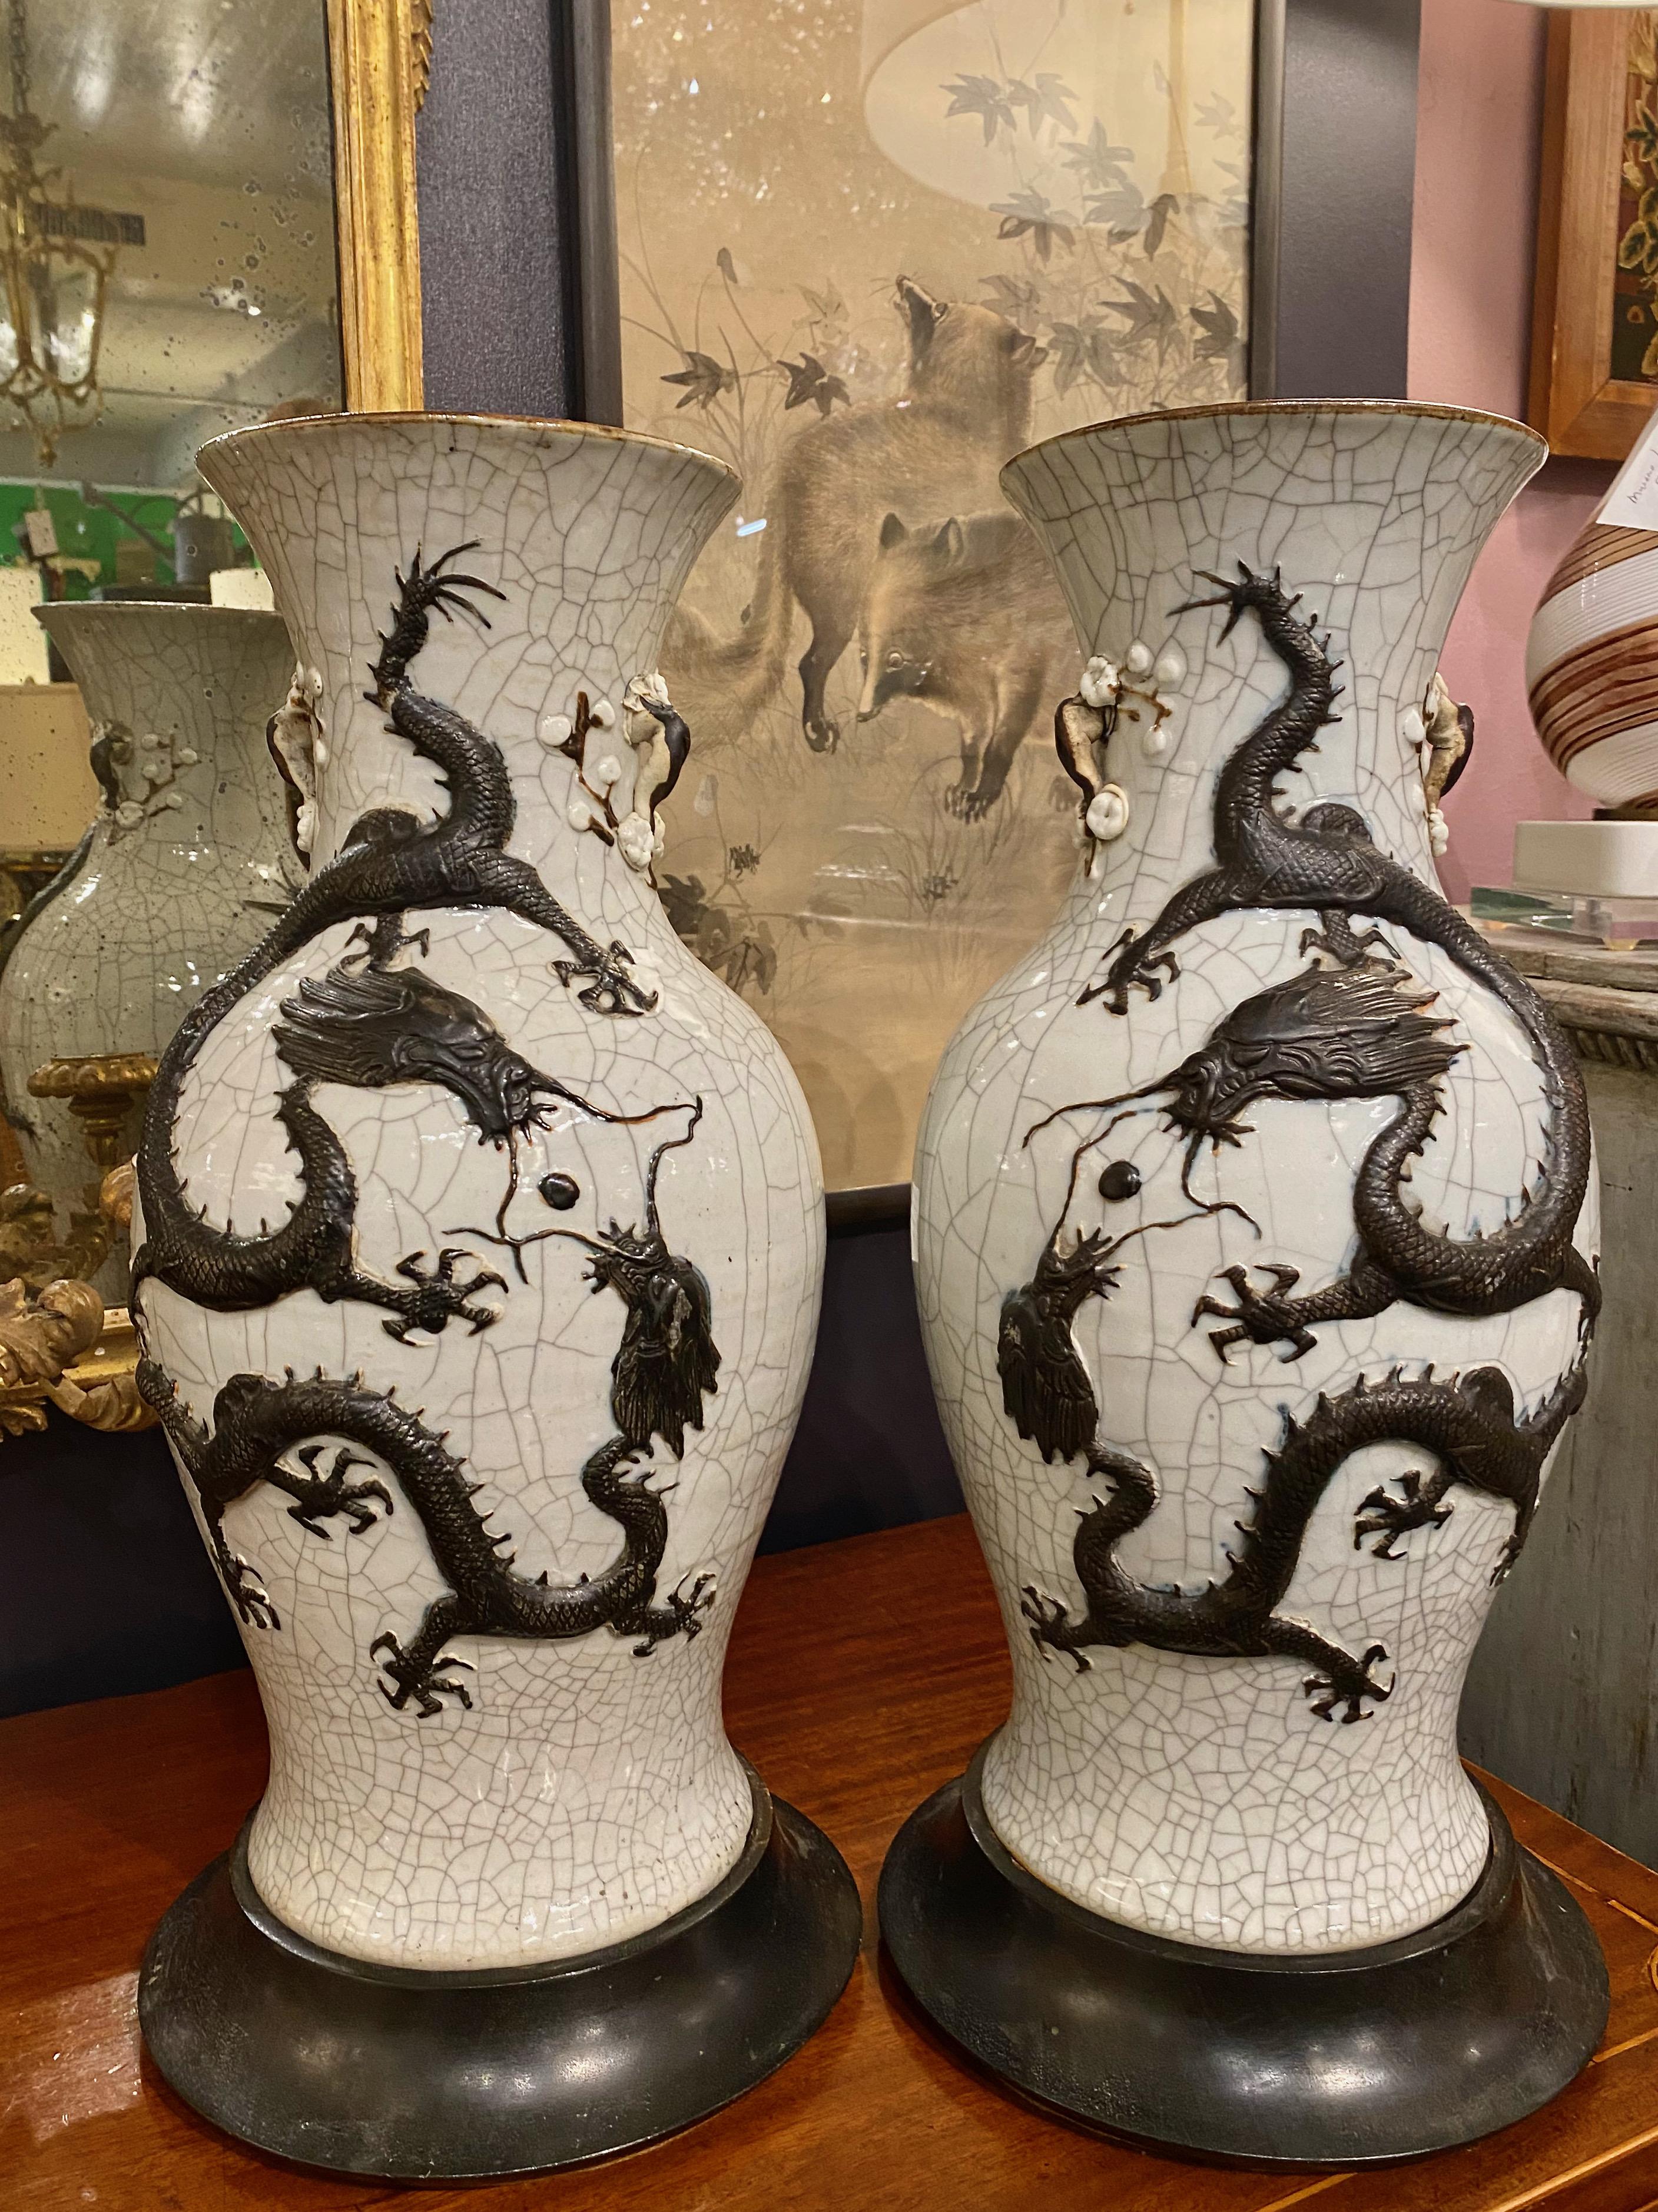 This is a very large and stunning pair of late 19th century Chinese Pale Celadon Crackle Glazed Dragon and Flaming Pearl Vases. The well-sculpted dragons are applied to the body of the vases and are highlighted in a dark-charcoal brown. The side